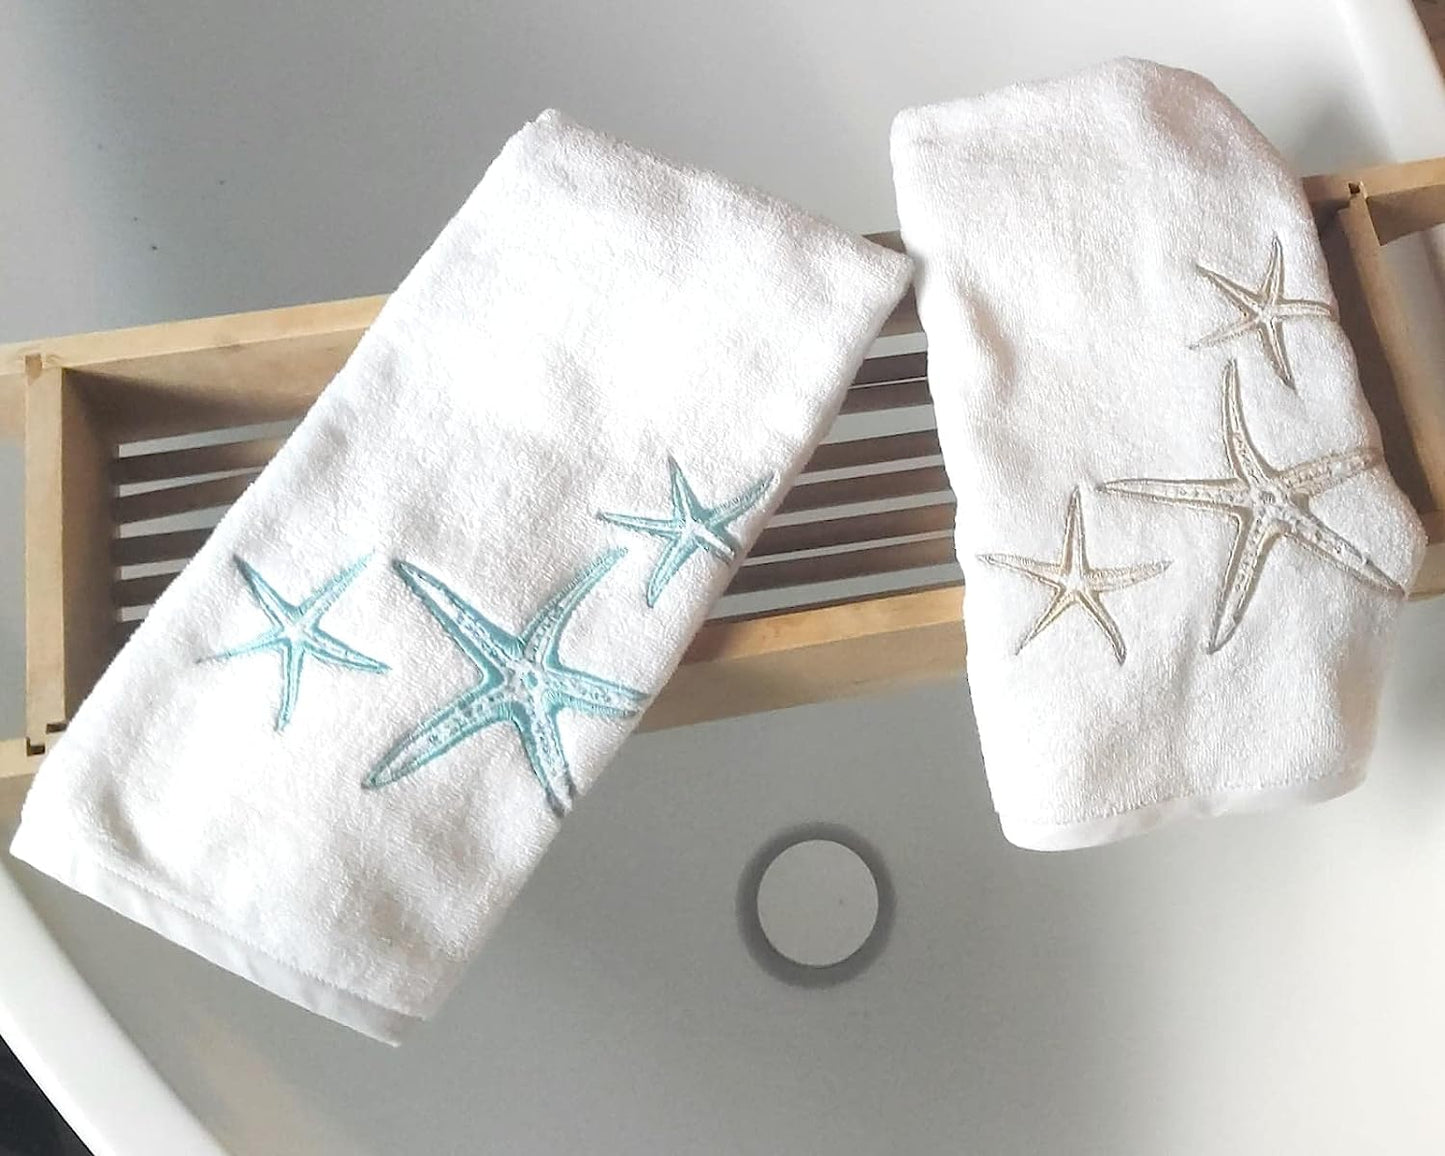 2-piece Towel Set (Face / Guest) fine cotton with embroidery, Luxury Yacht collection, 100% made in Italy, Marika De Paola (White / Bicolor Starfish)